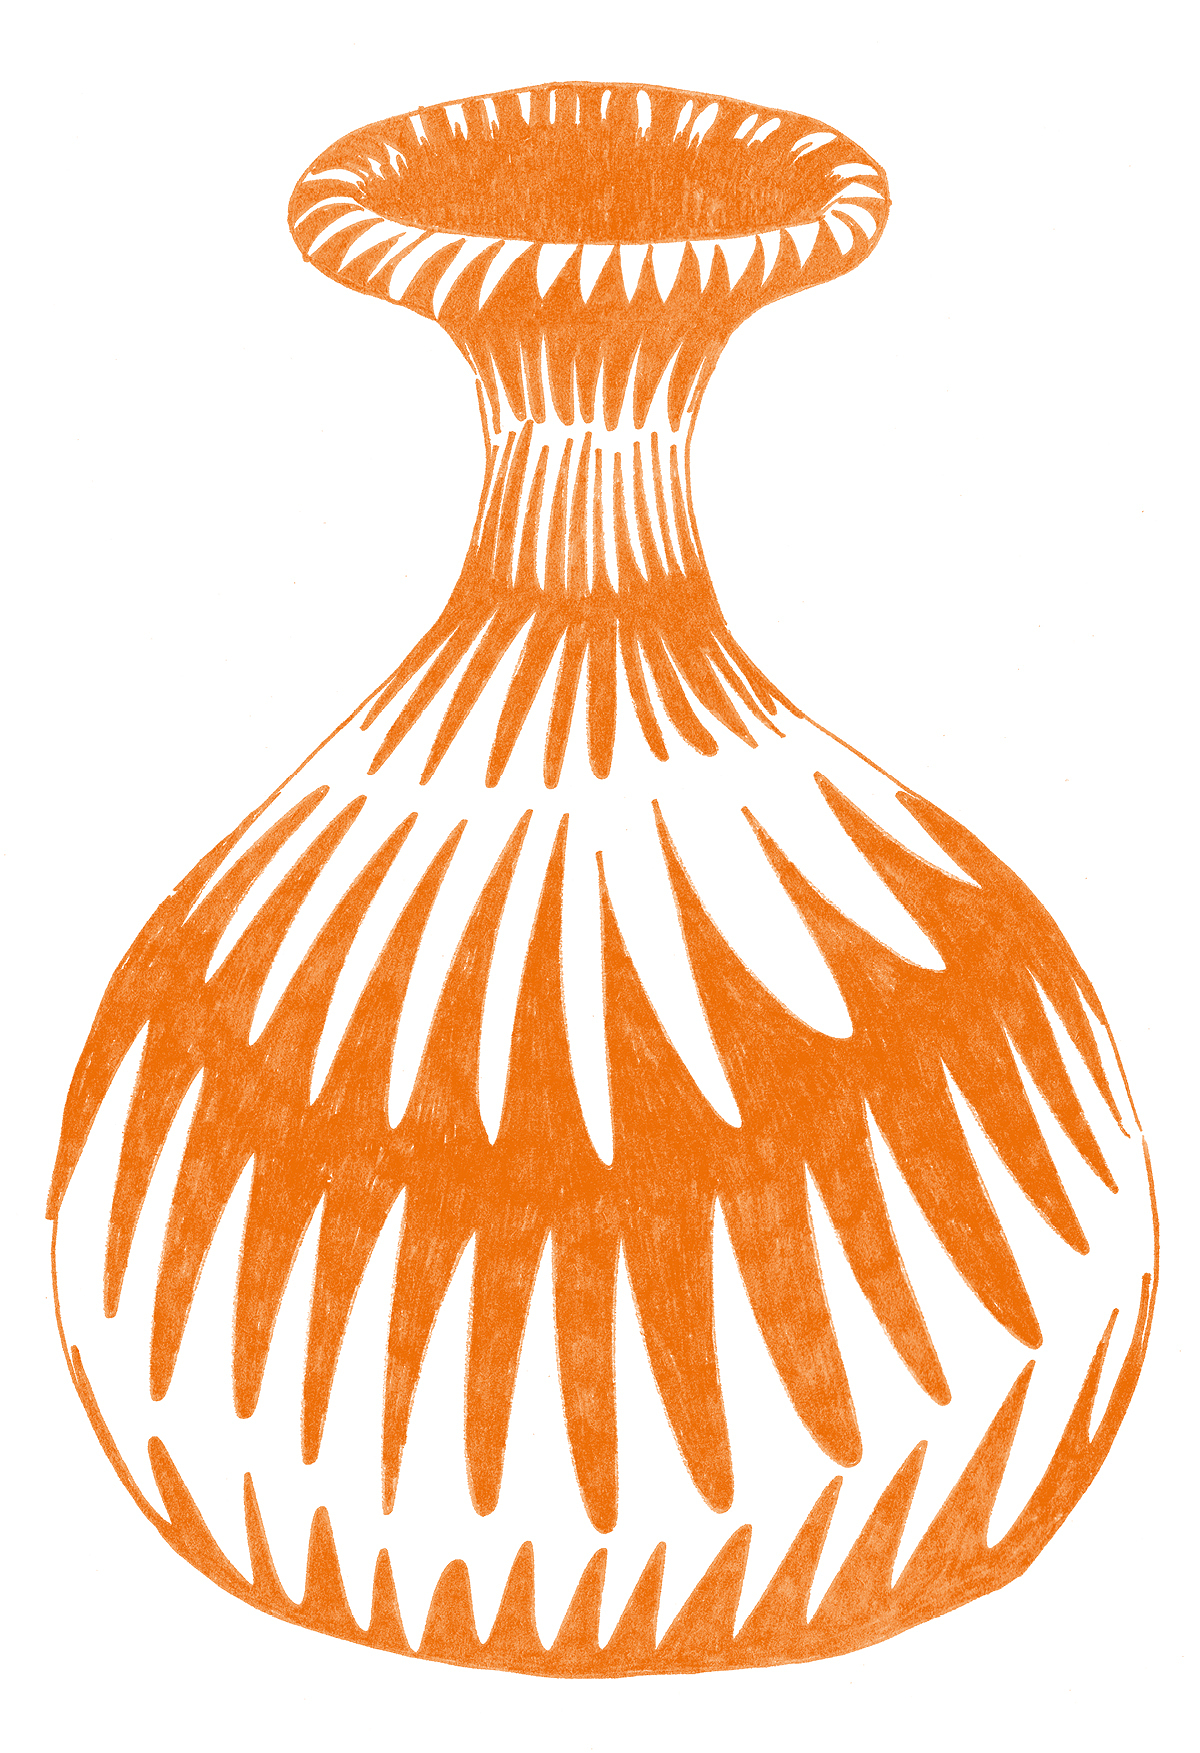 A drawing in bright orange pencil crayon of a vase covered with zigzag patterns.